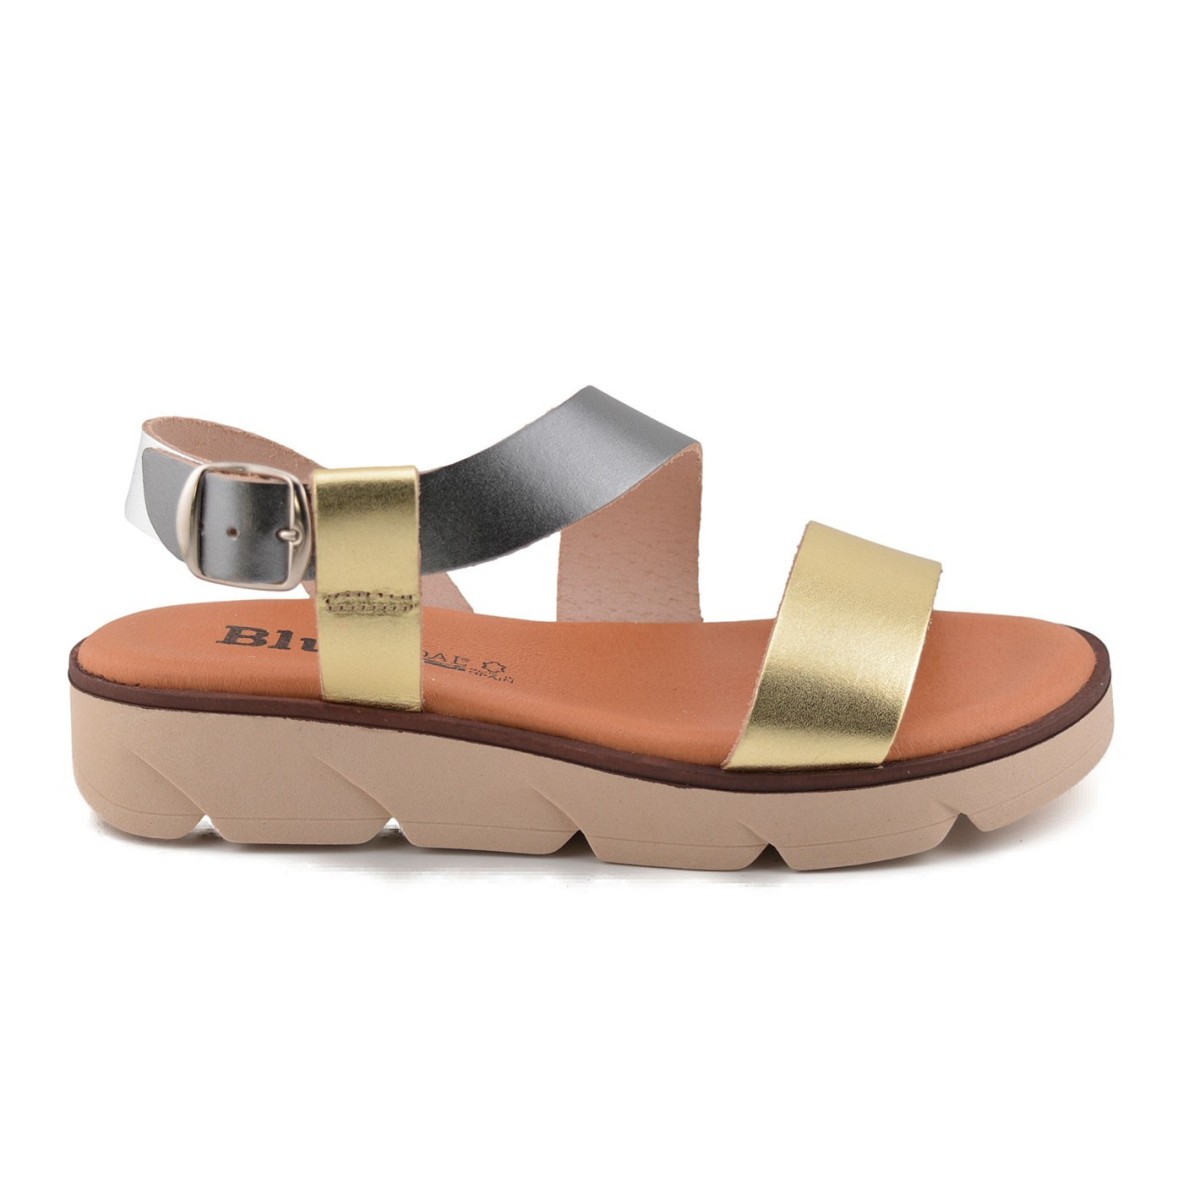 Metallic leather sandals by Blusandal